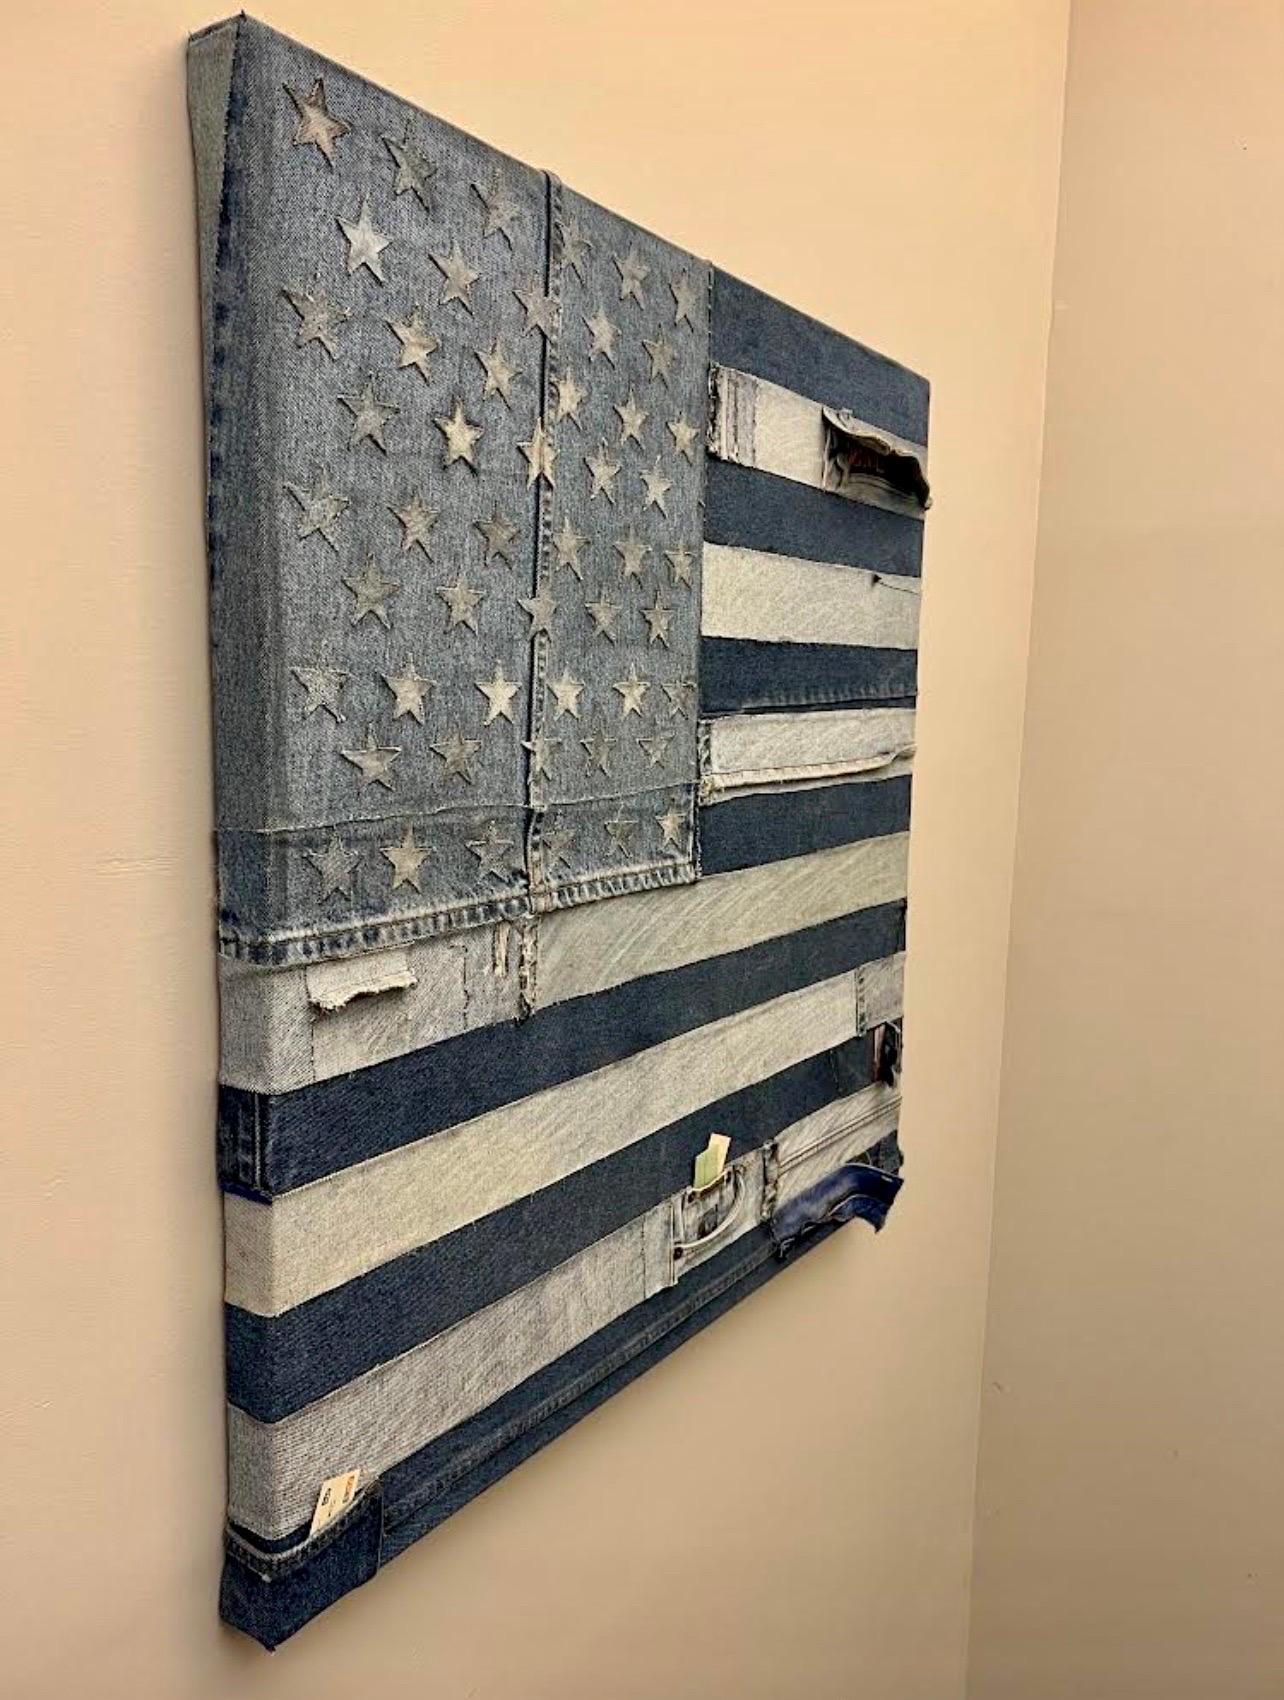 

Pop Art American Flag in Handsewn Patchwork Denim. Label from Pratt verso (Pratt MFA '75) 
I had another with a label from OK Harris Gallery verso. This one does not have that label. 
Hand signed
Genre: Modern
Medium: Denim Jean Textile Fabric,